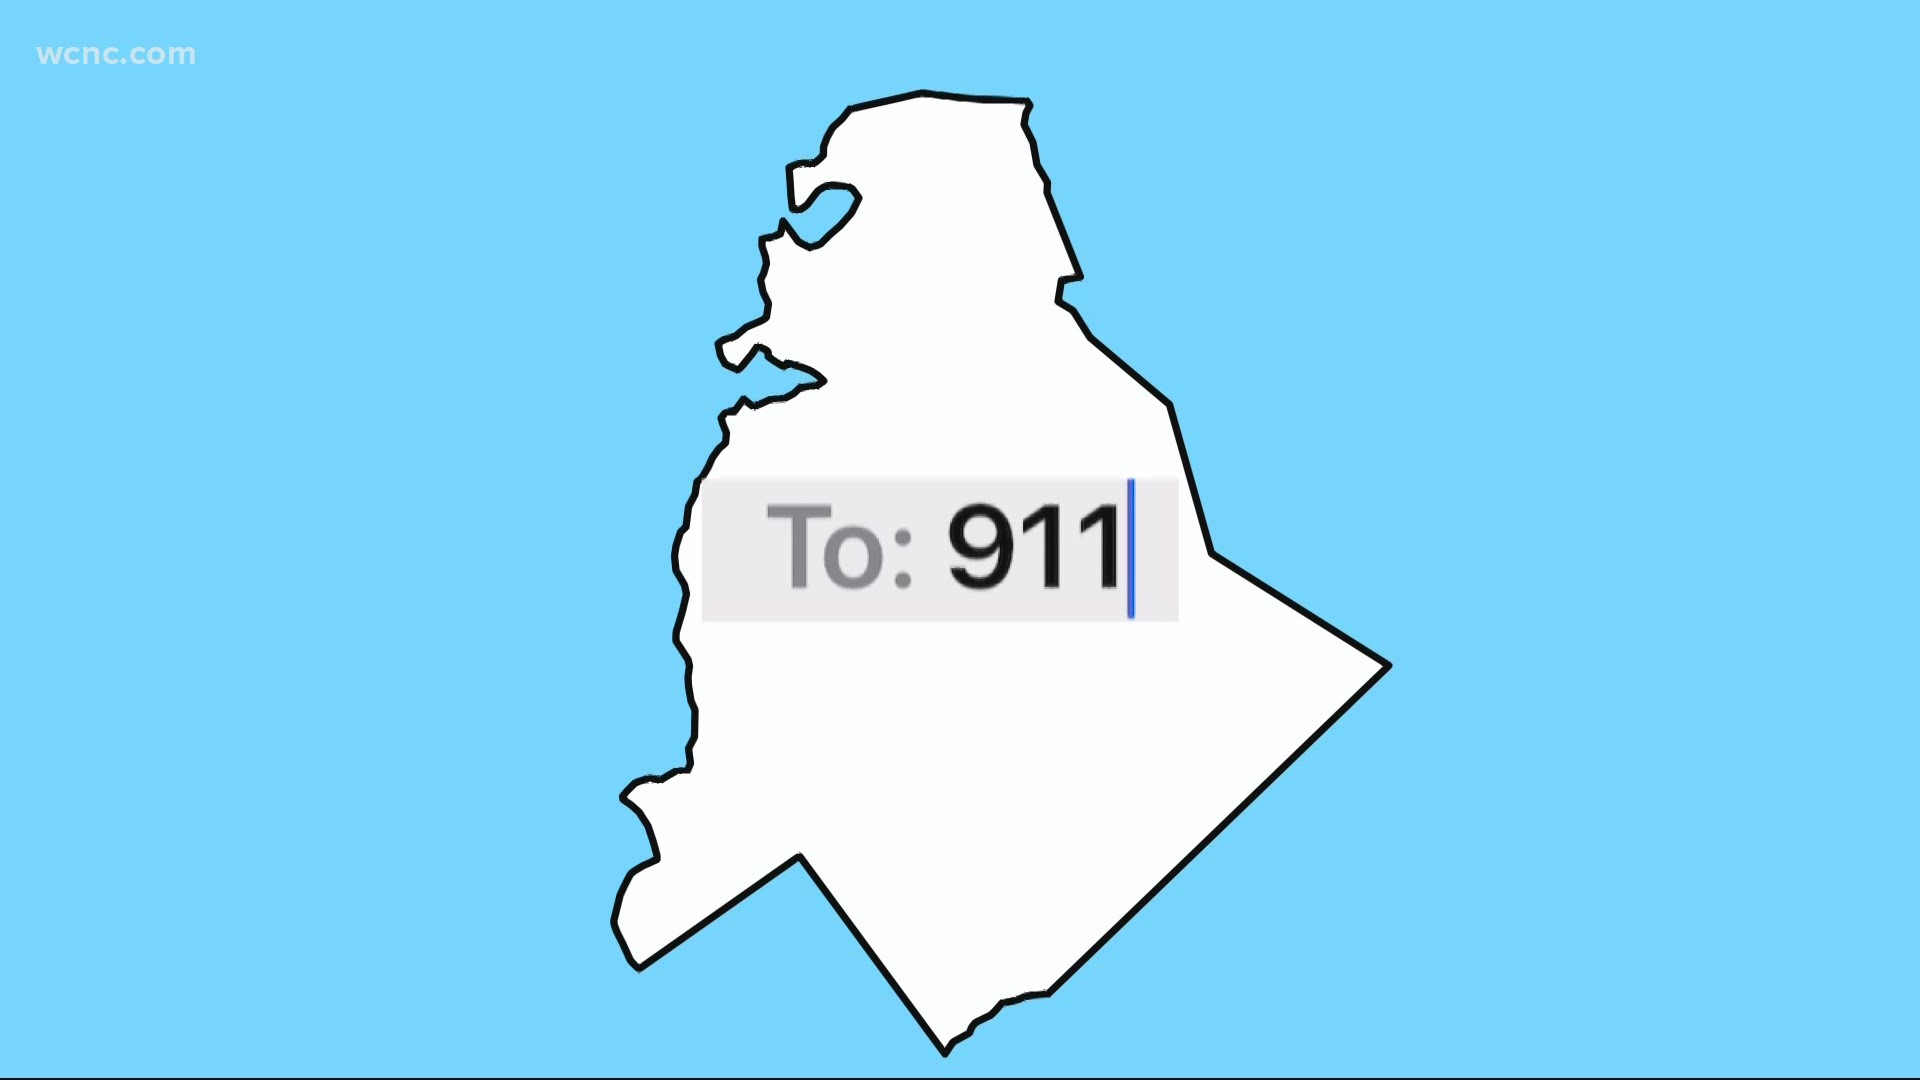 In a presser, CMPD stated, "Texting 911 should be used if you are deaf, hard of hearing or when speaking on the phone will endanger your life in circumstances.